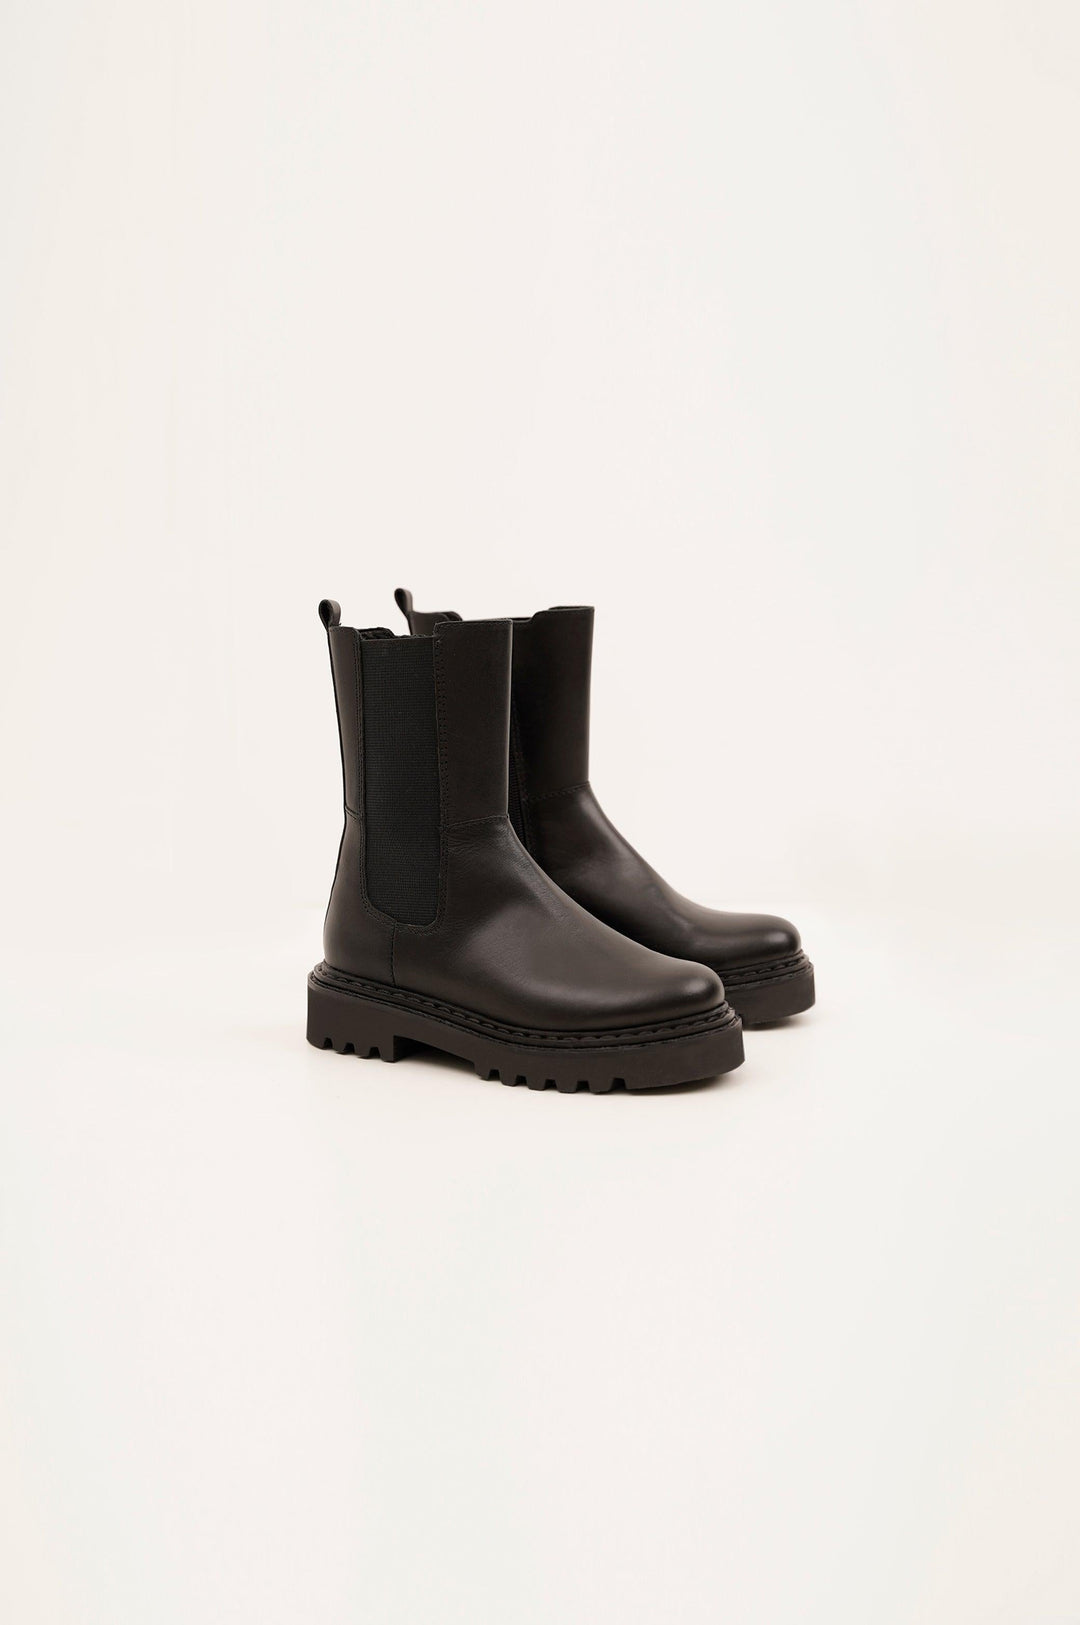 LEATHER BOOTS - CHELSEA BOOTS